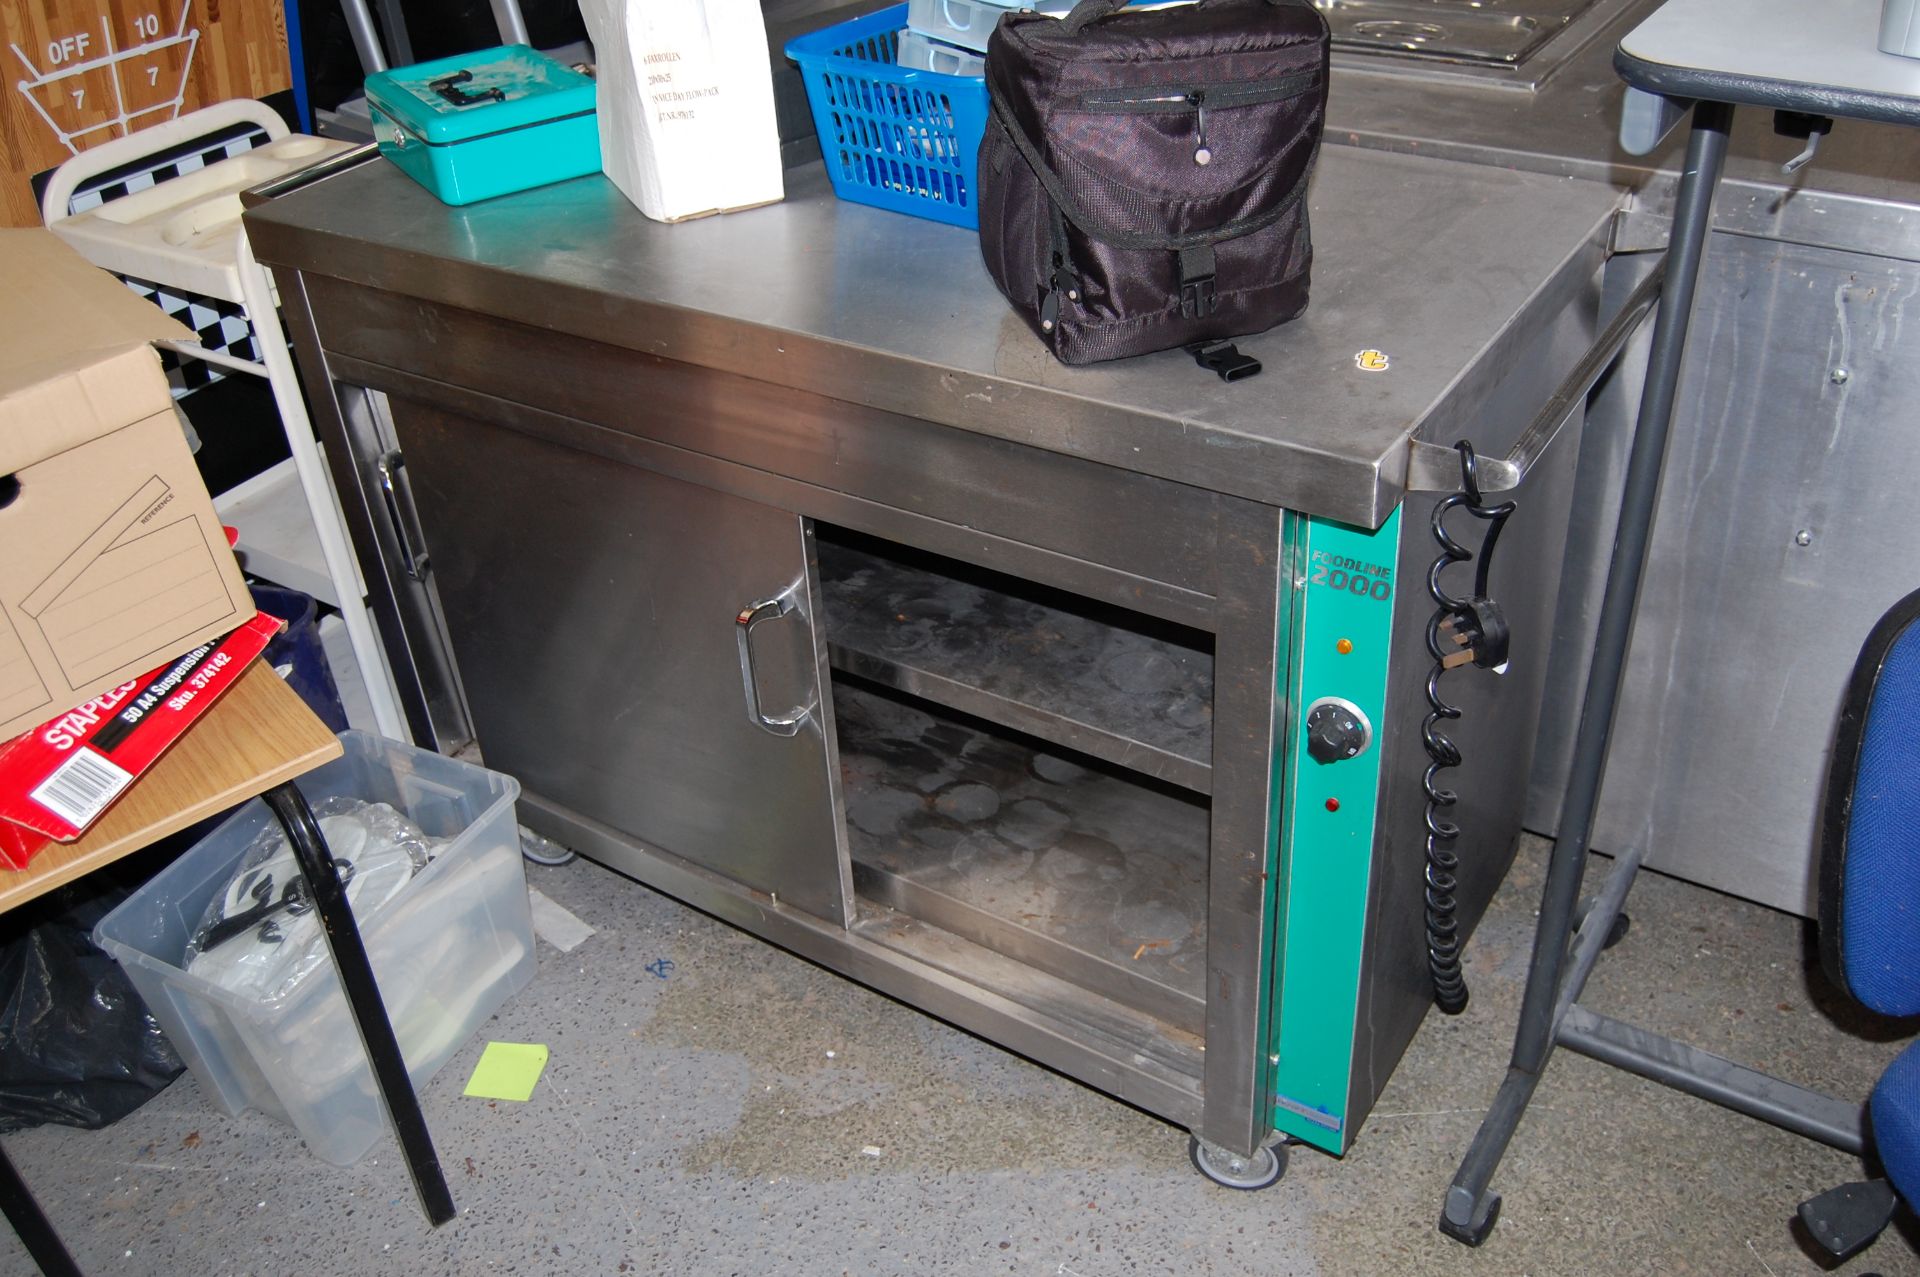 Hot mobile hostess trolley, stainless steel